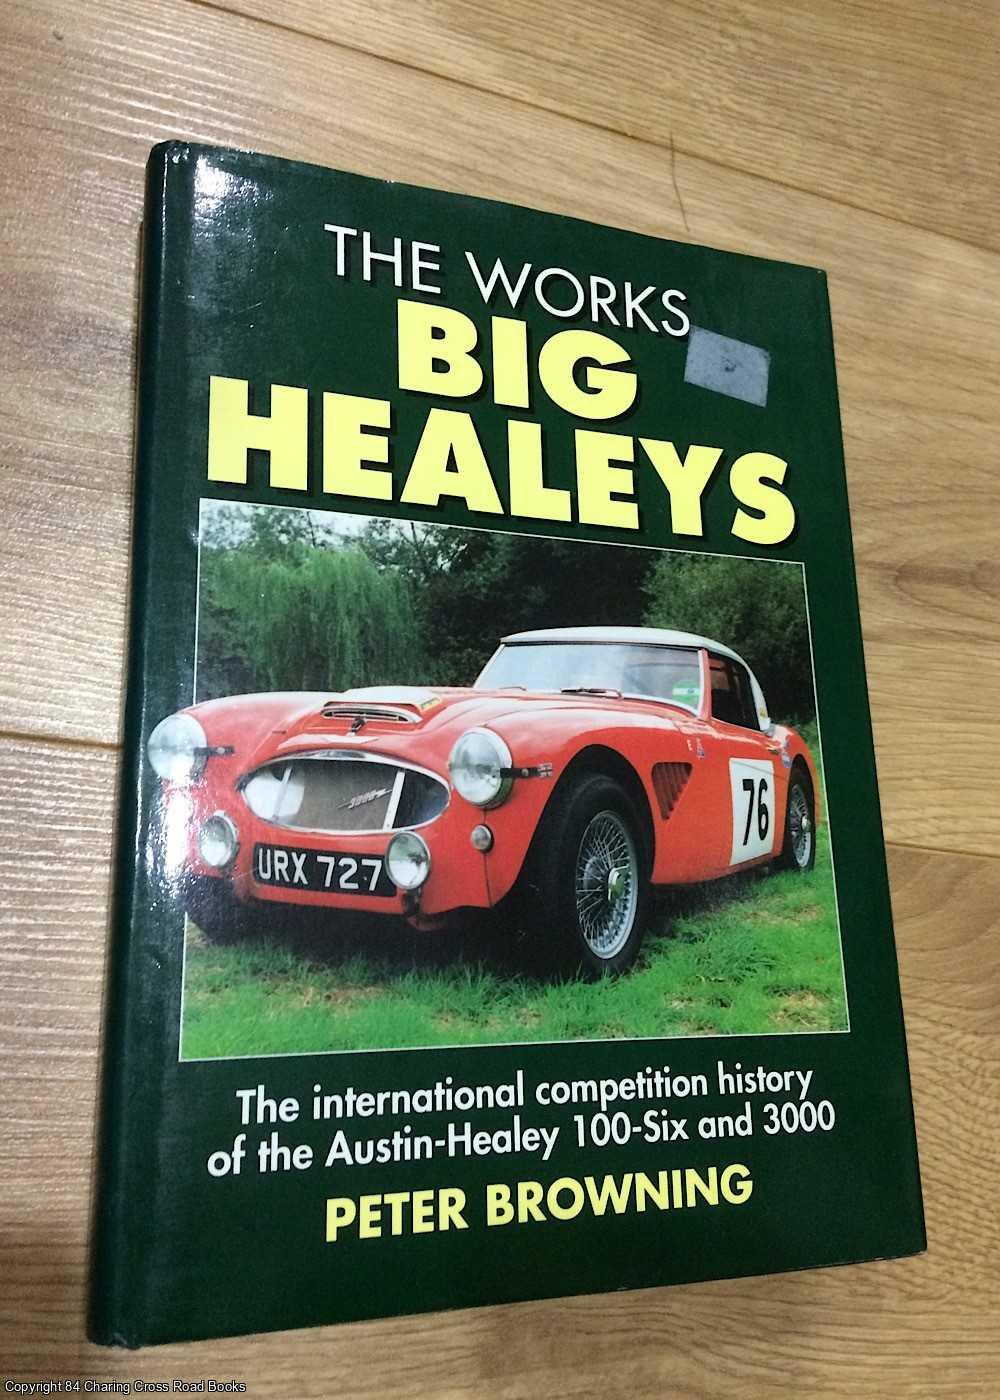 Browning, Peter - The Works Big Healeys: The International Competition History of the Austin-Healey 100-six and 3000